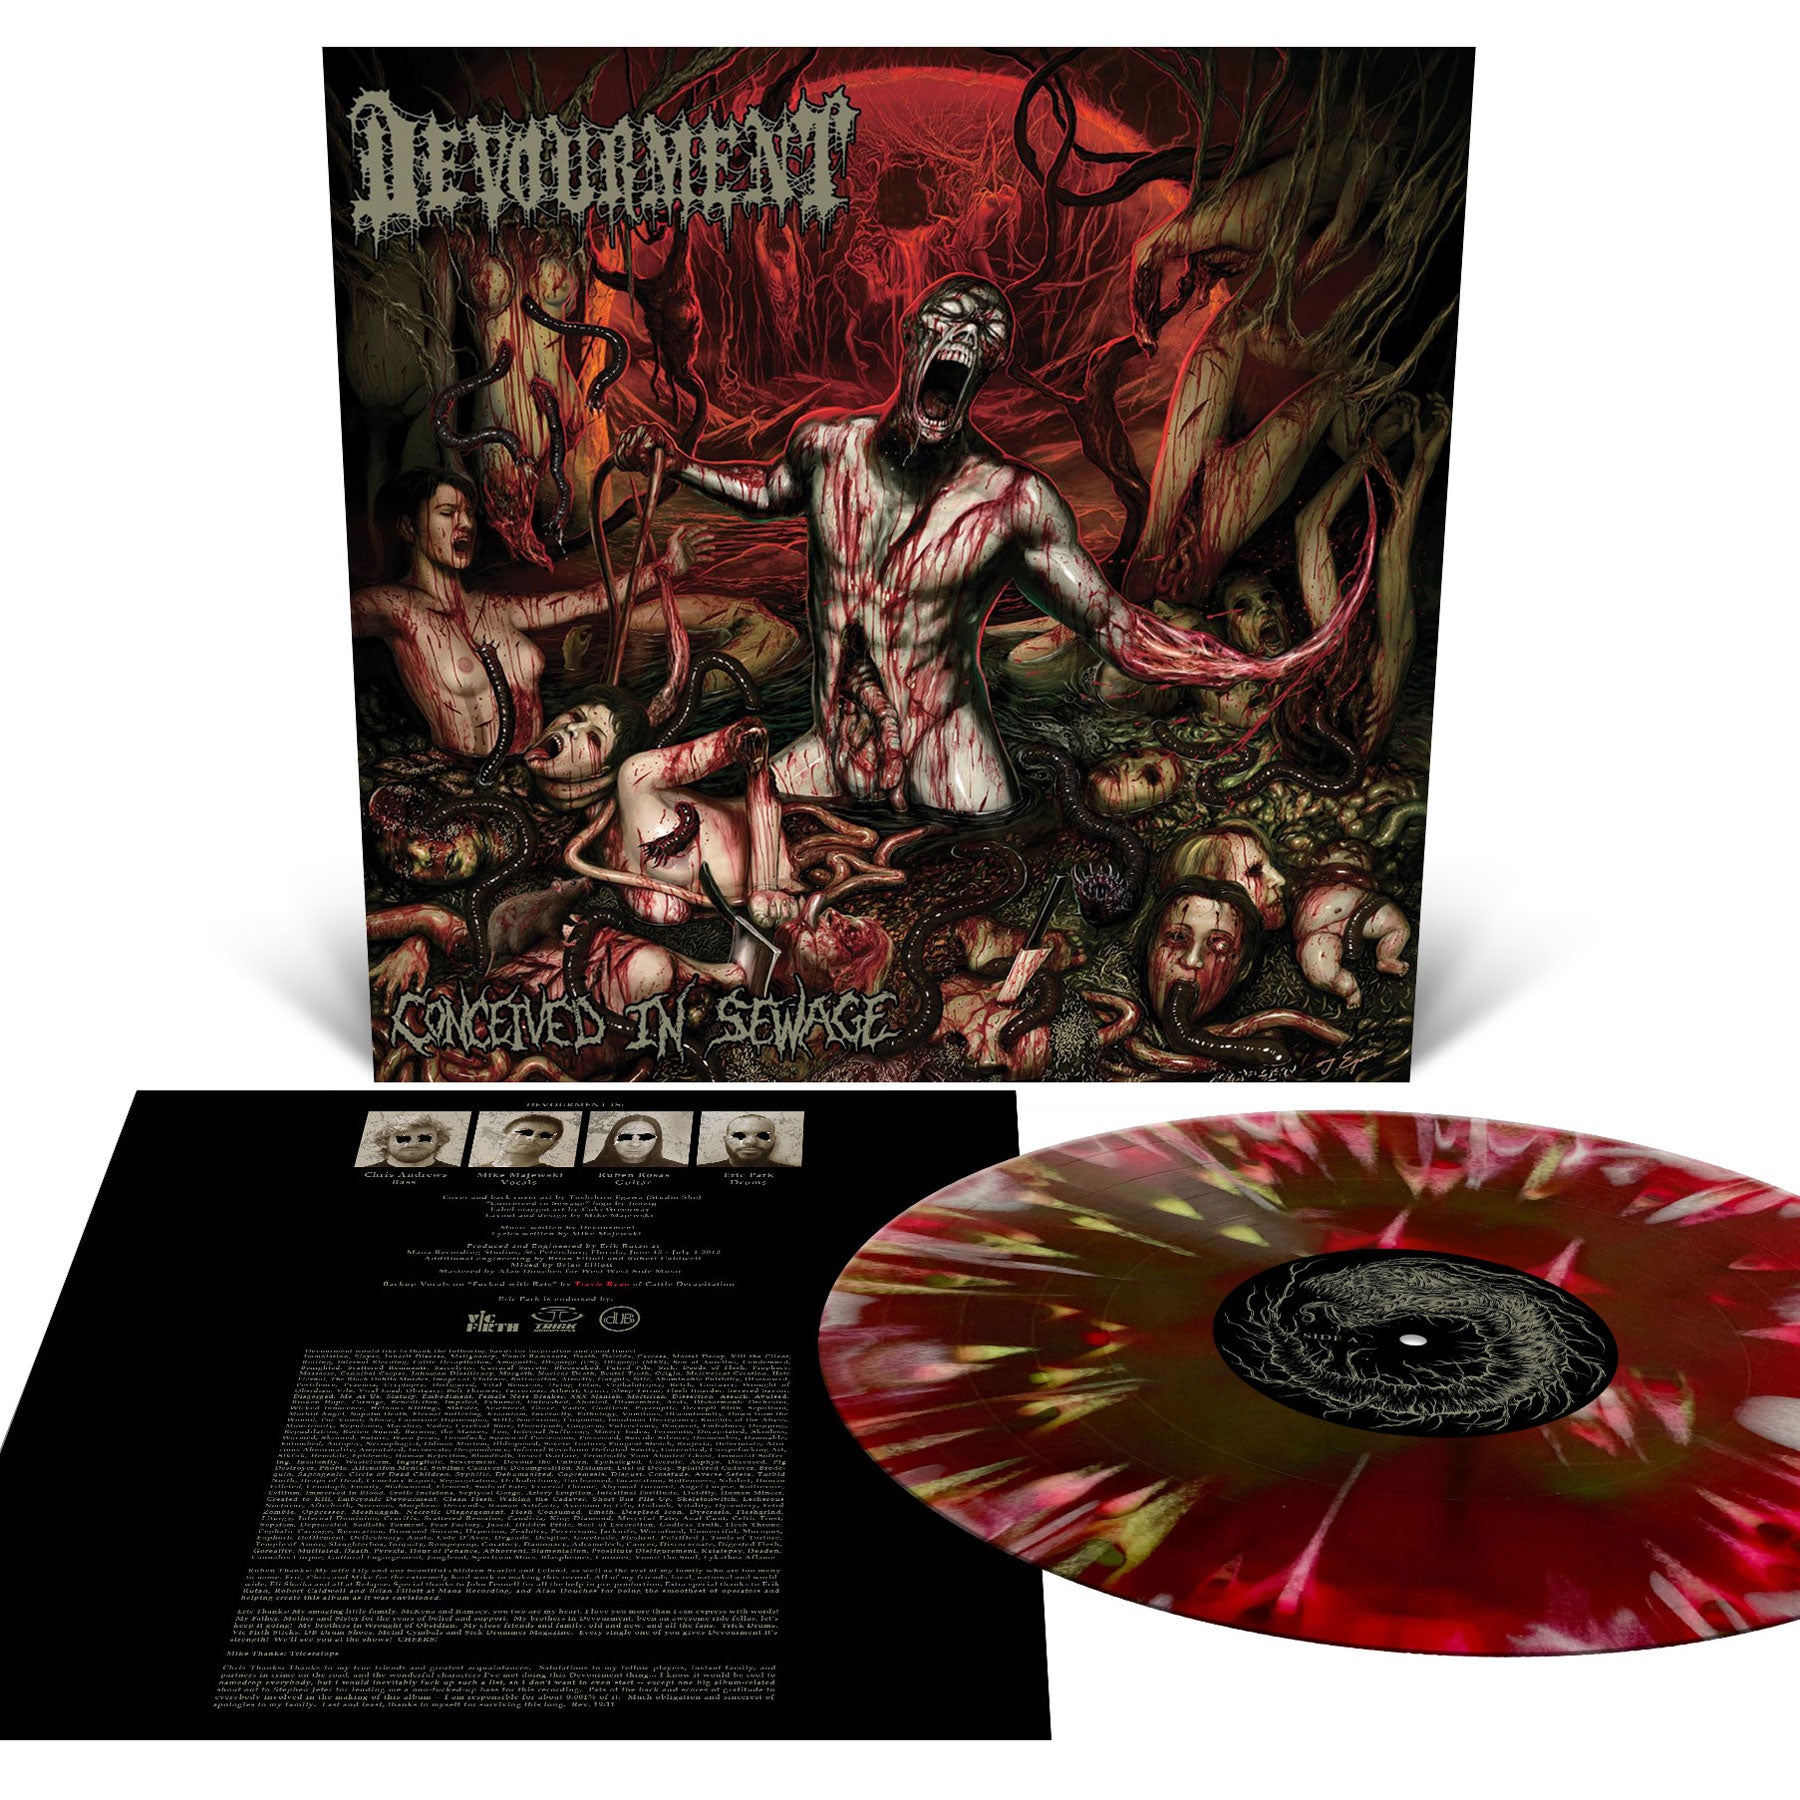 Devourment "Conceived In Sewage" 12"